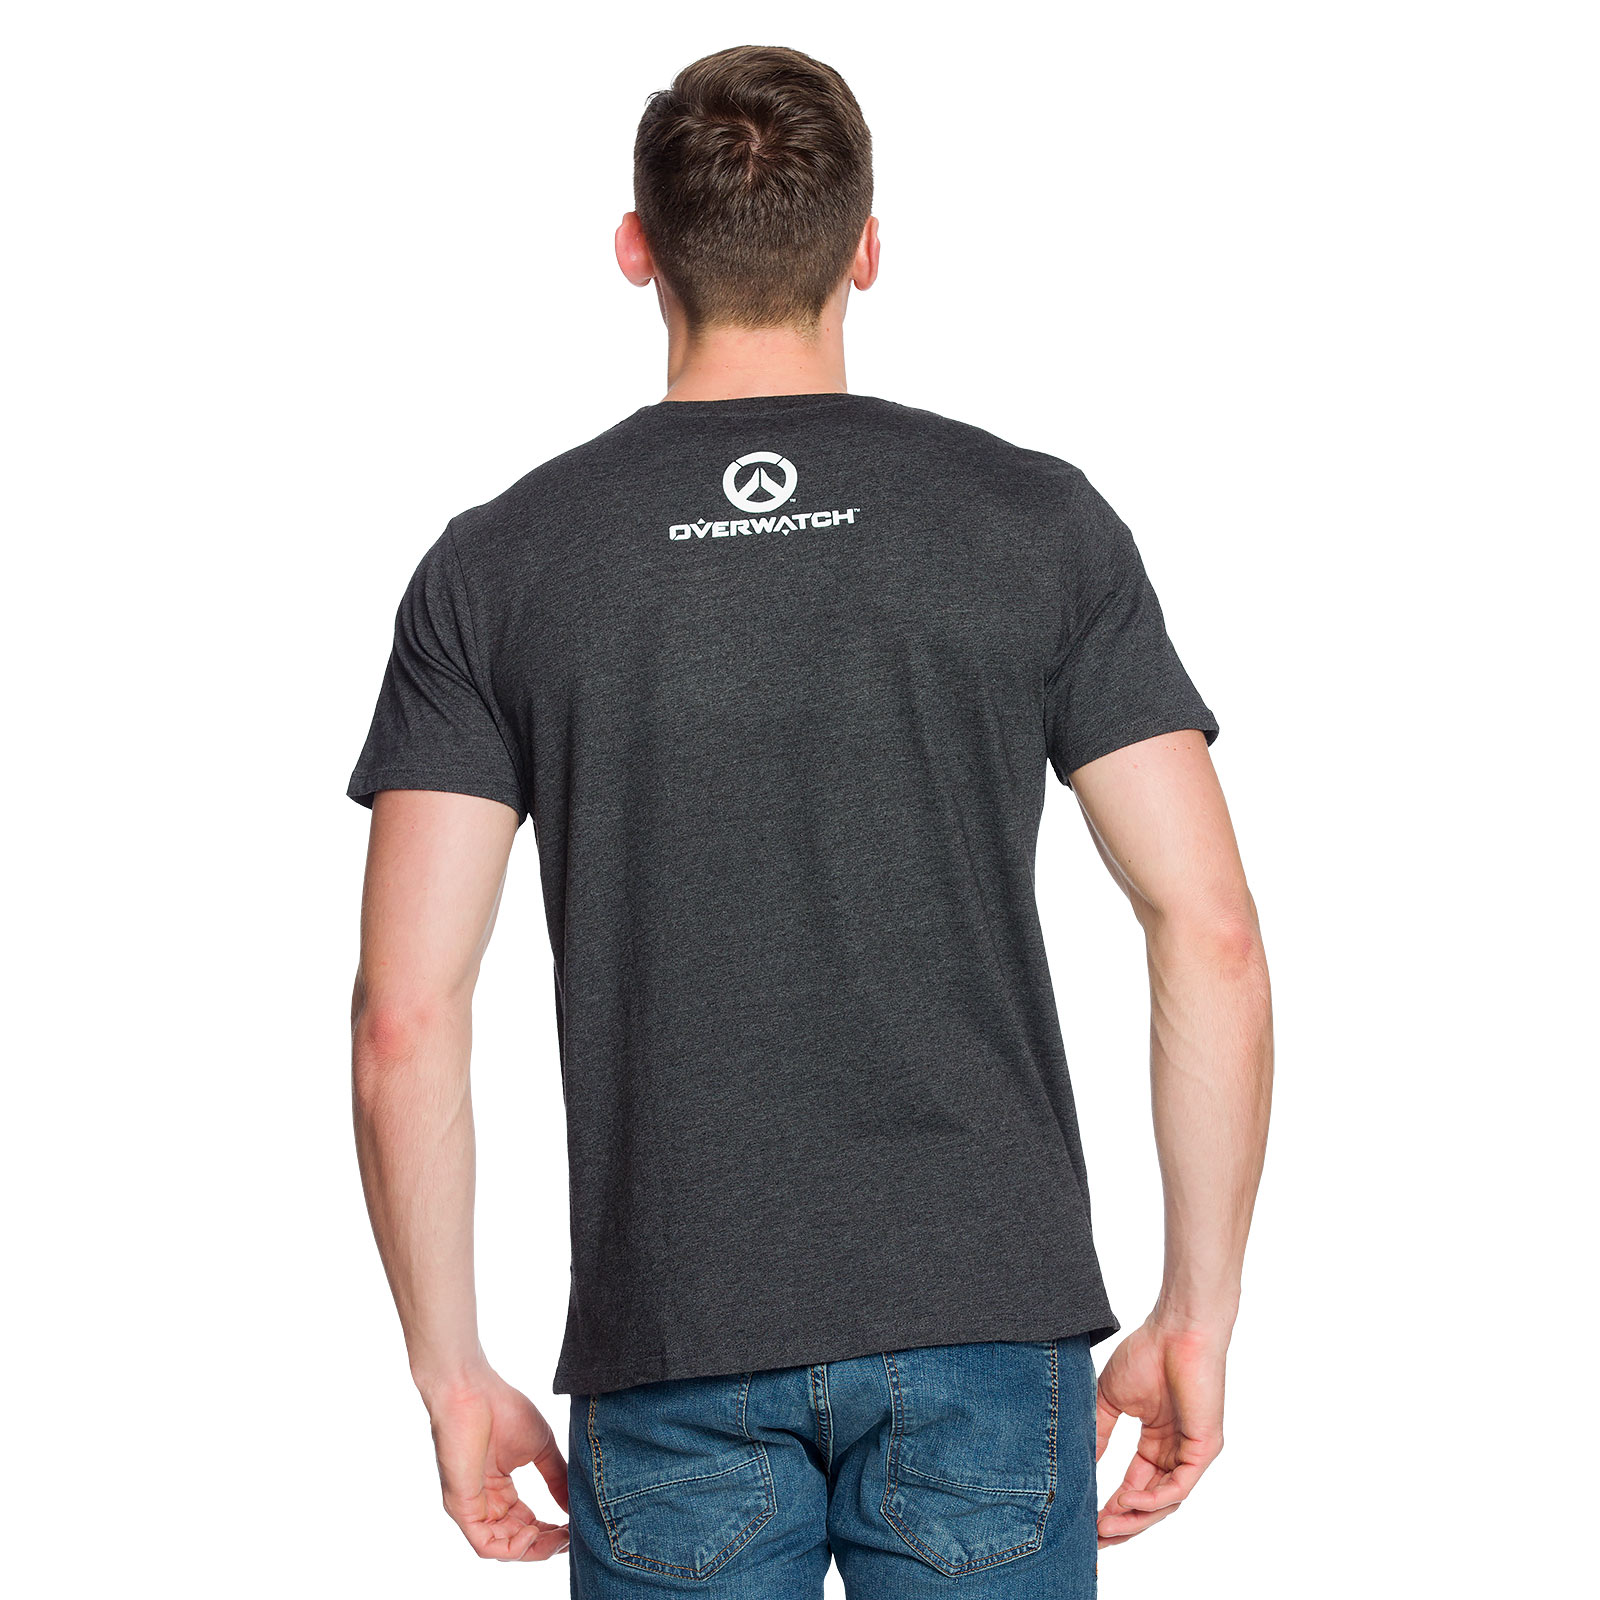 Overwatch - Bring Your Friends T-Shirt grey